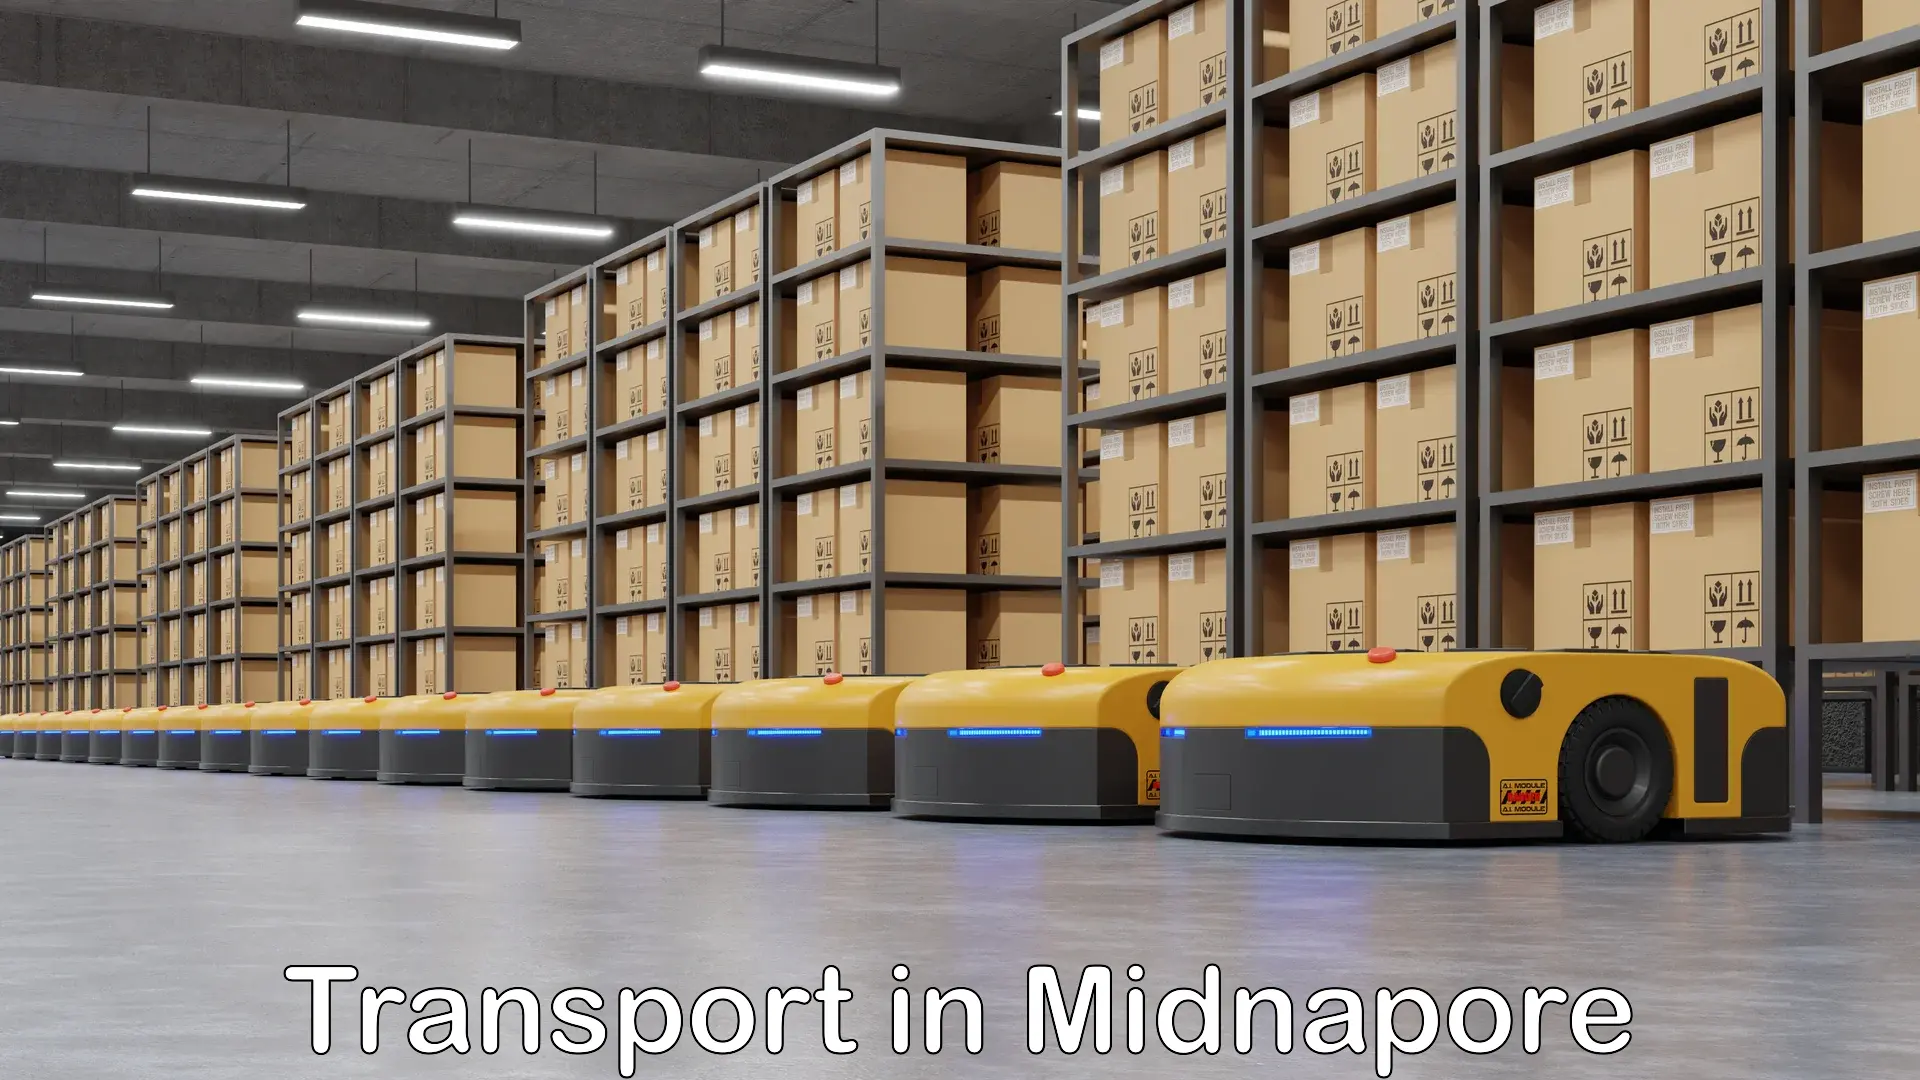 Daily parcel service transport in Midnapore